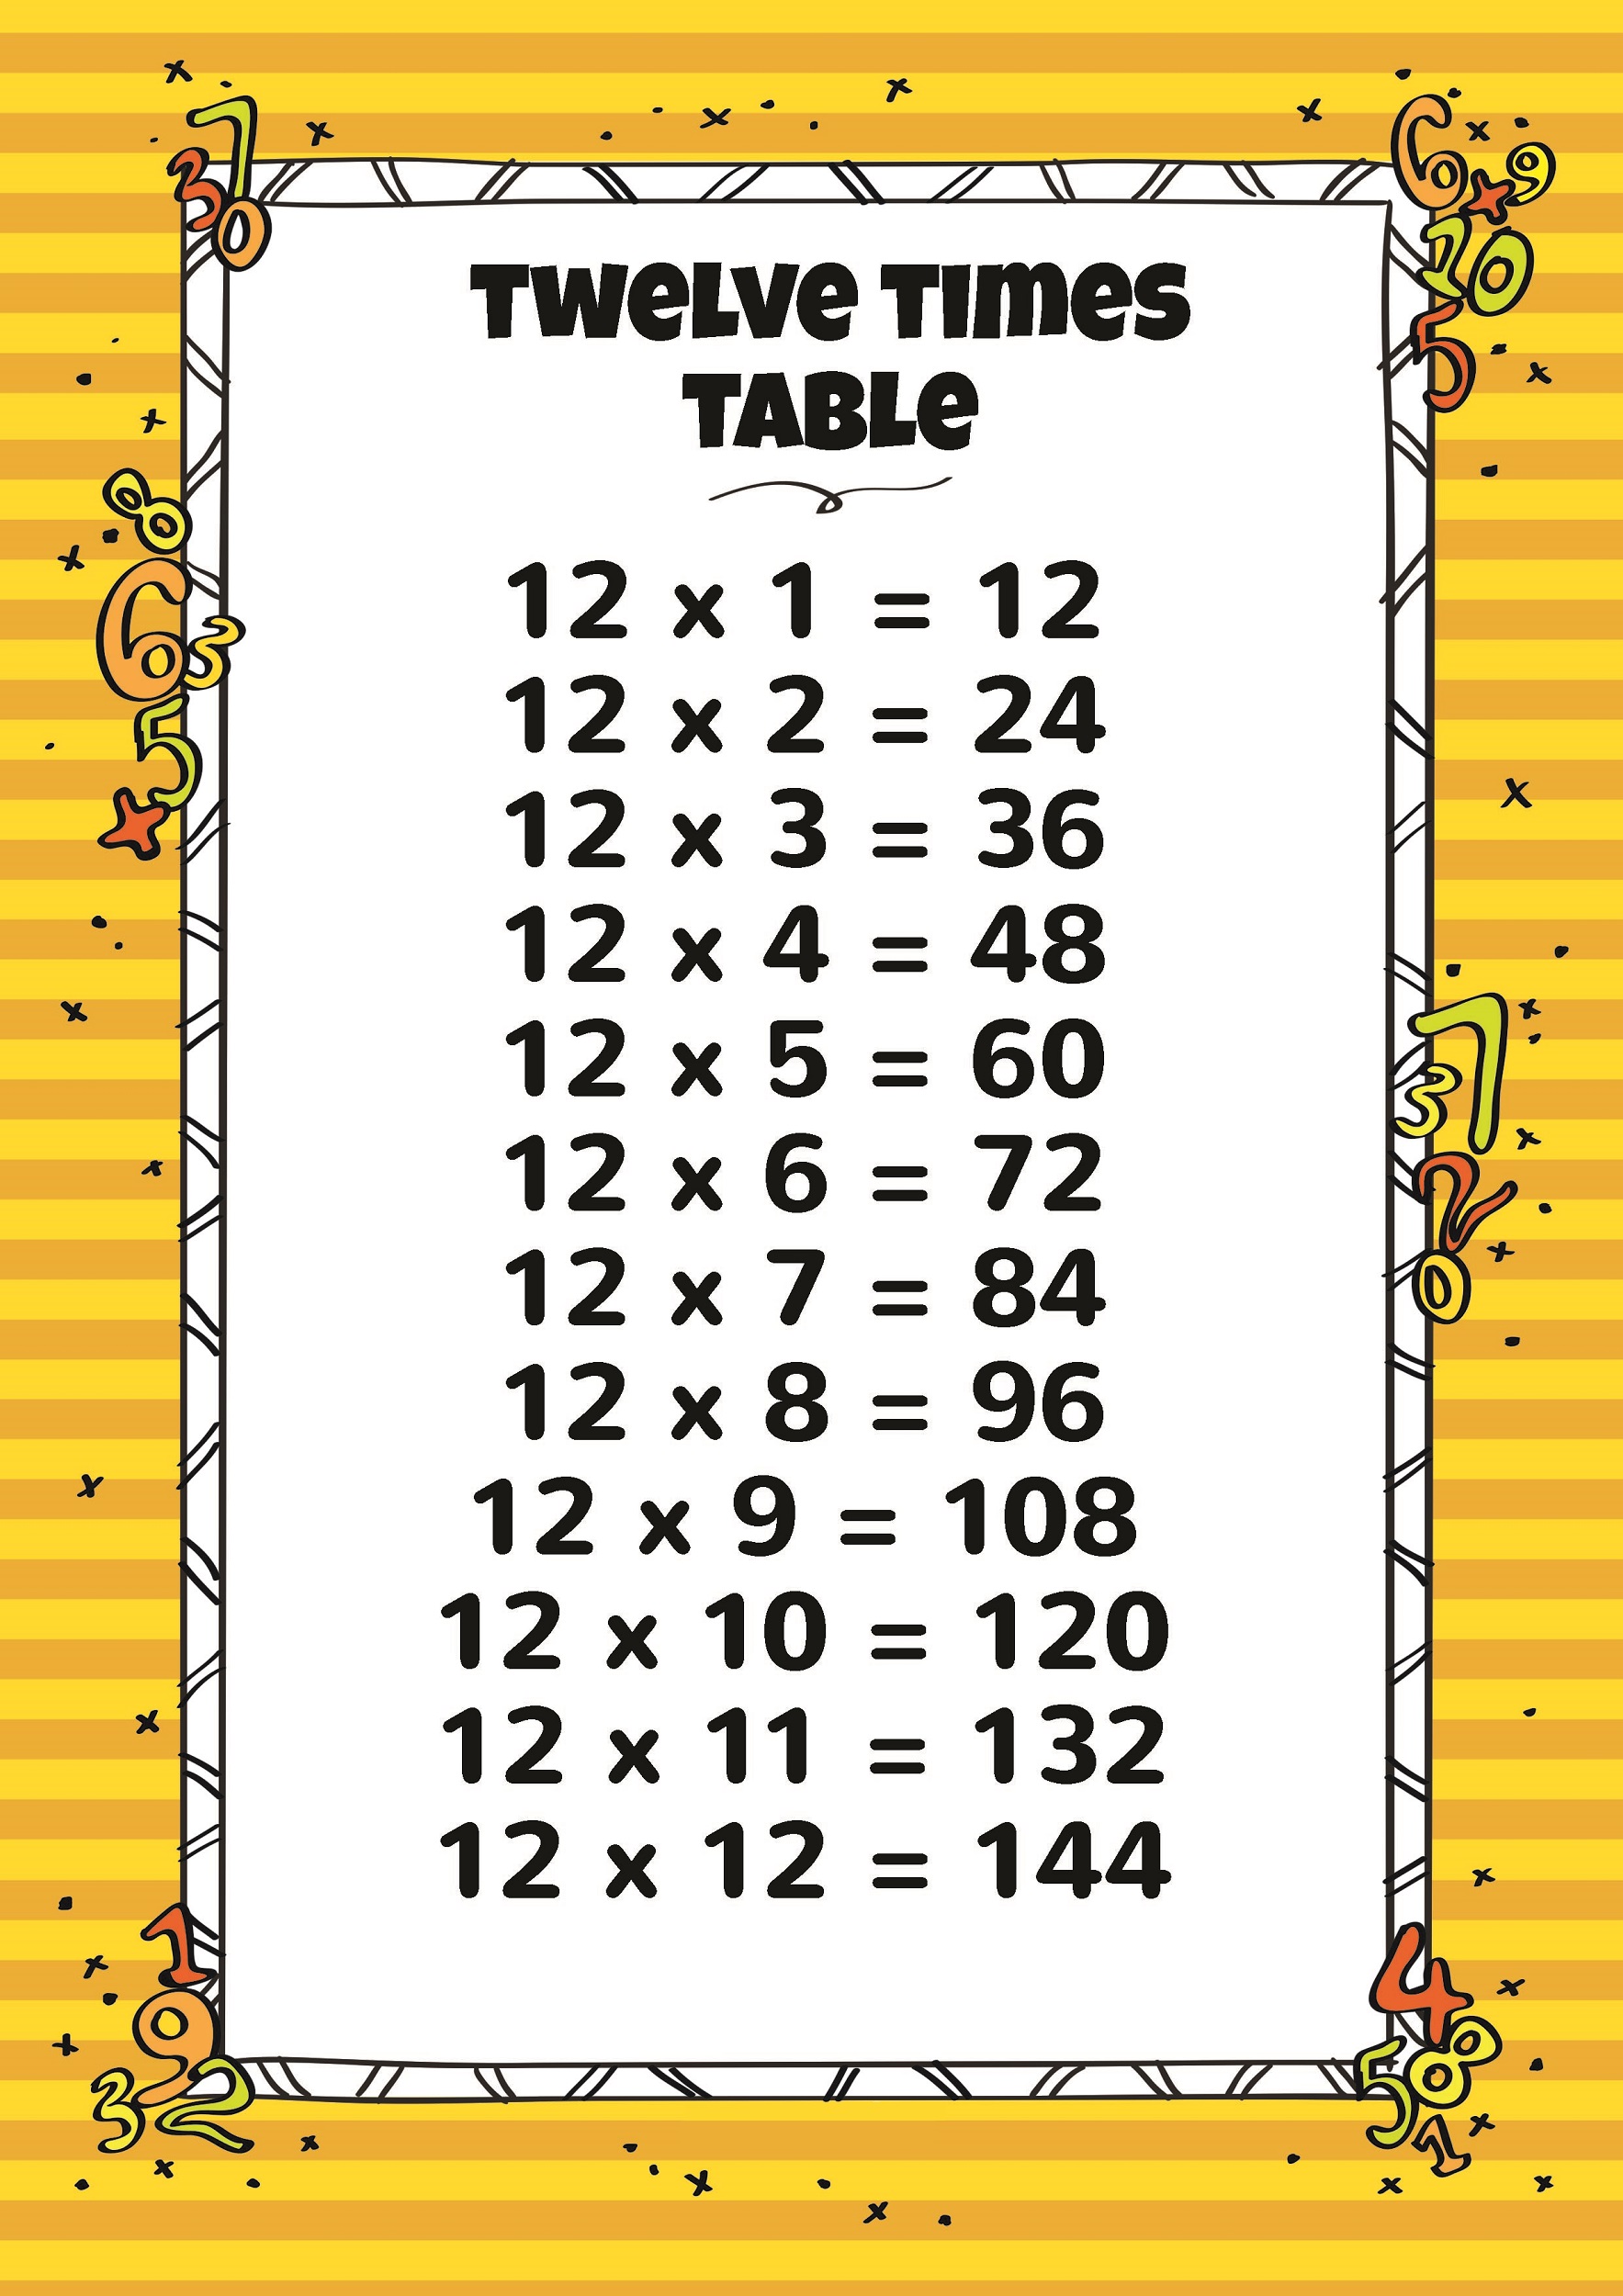 11 and 12 times tables for kids